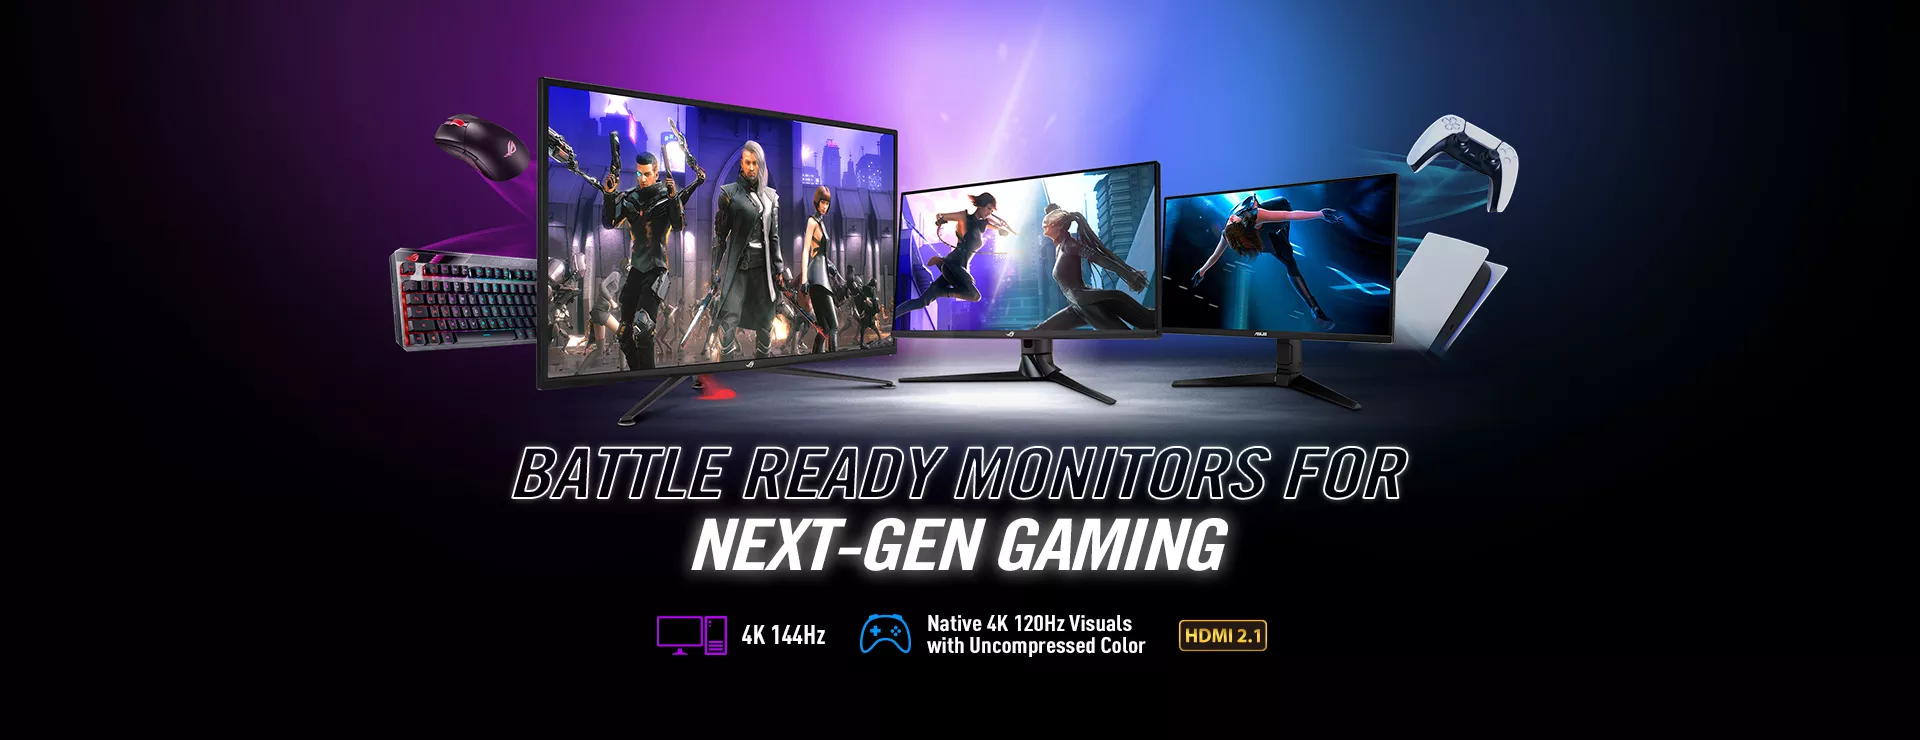 Battle Ready Monitors for Next-Gen Gaming